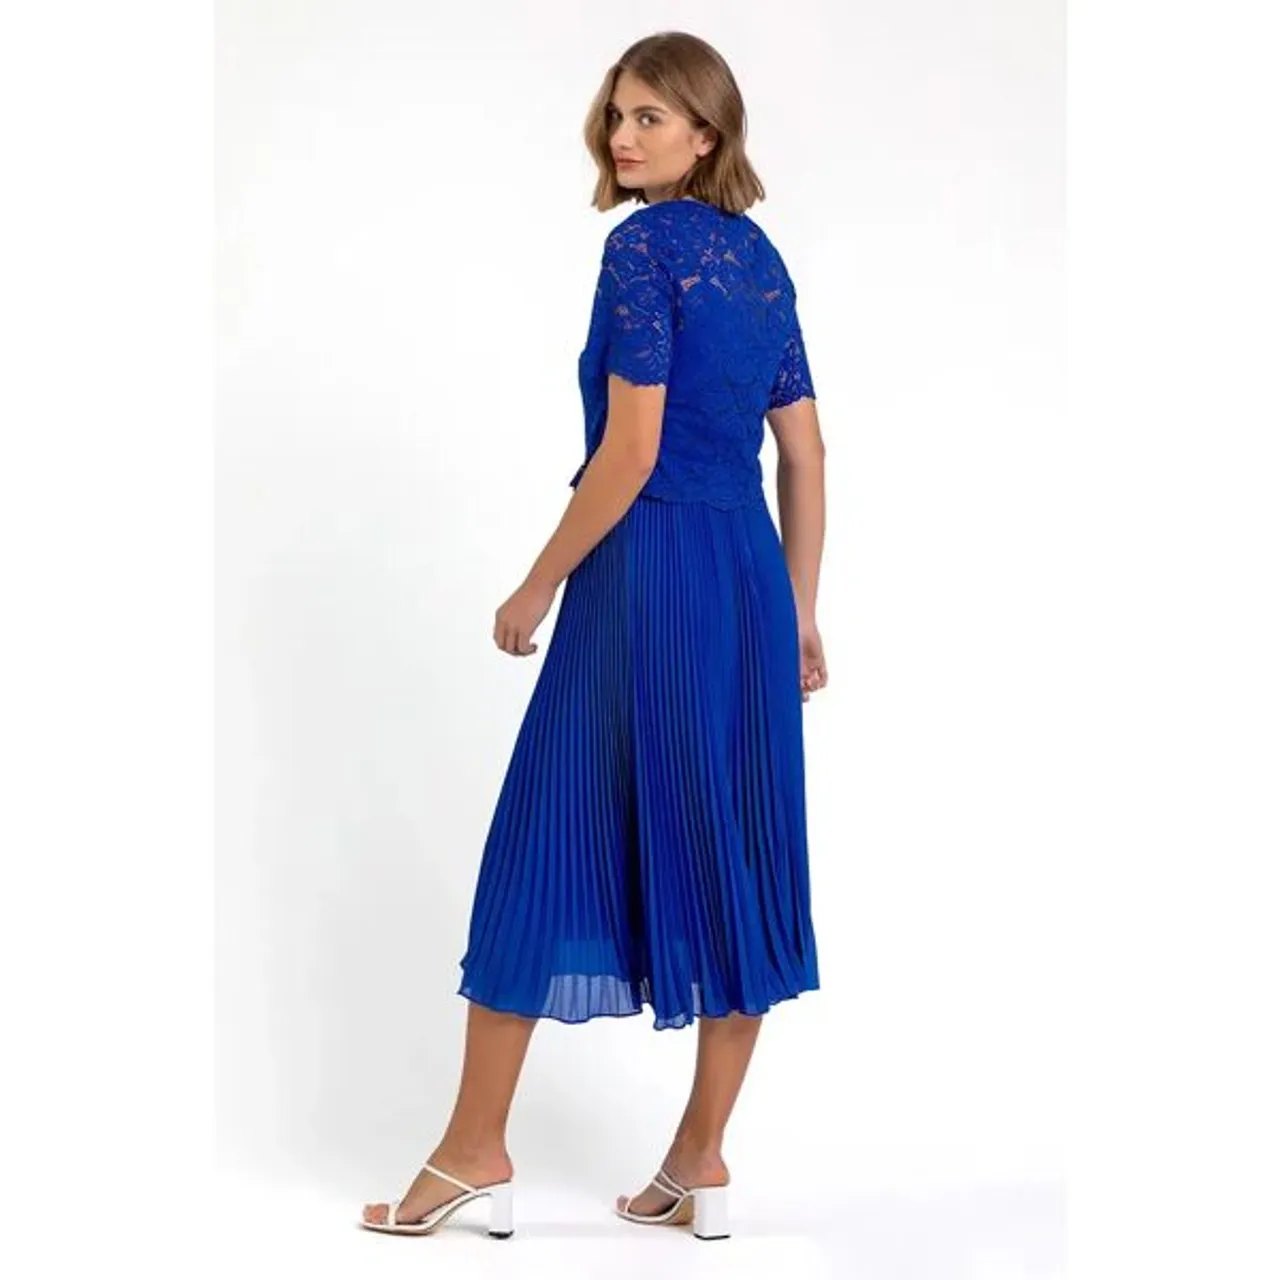 Roman Lace Top Overlay Pleated Midi Dress in Royal Blue - Size 14 14 female